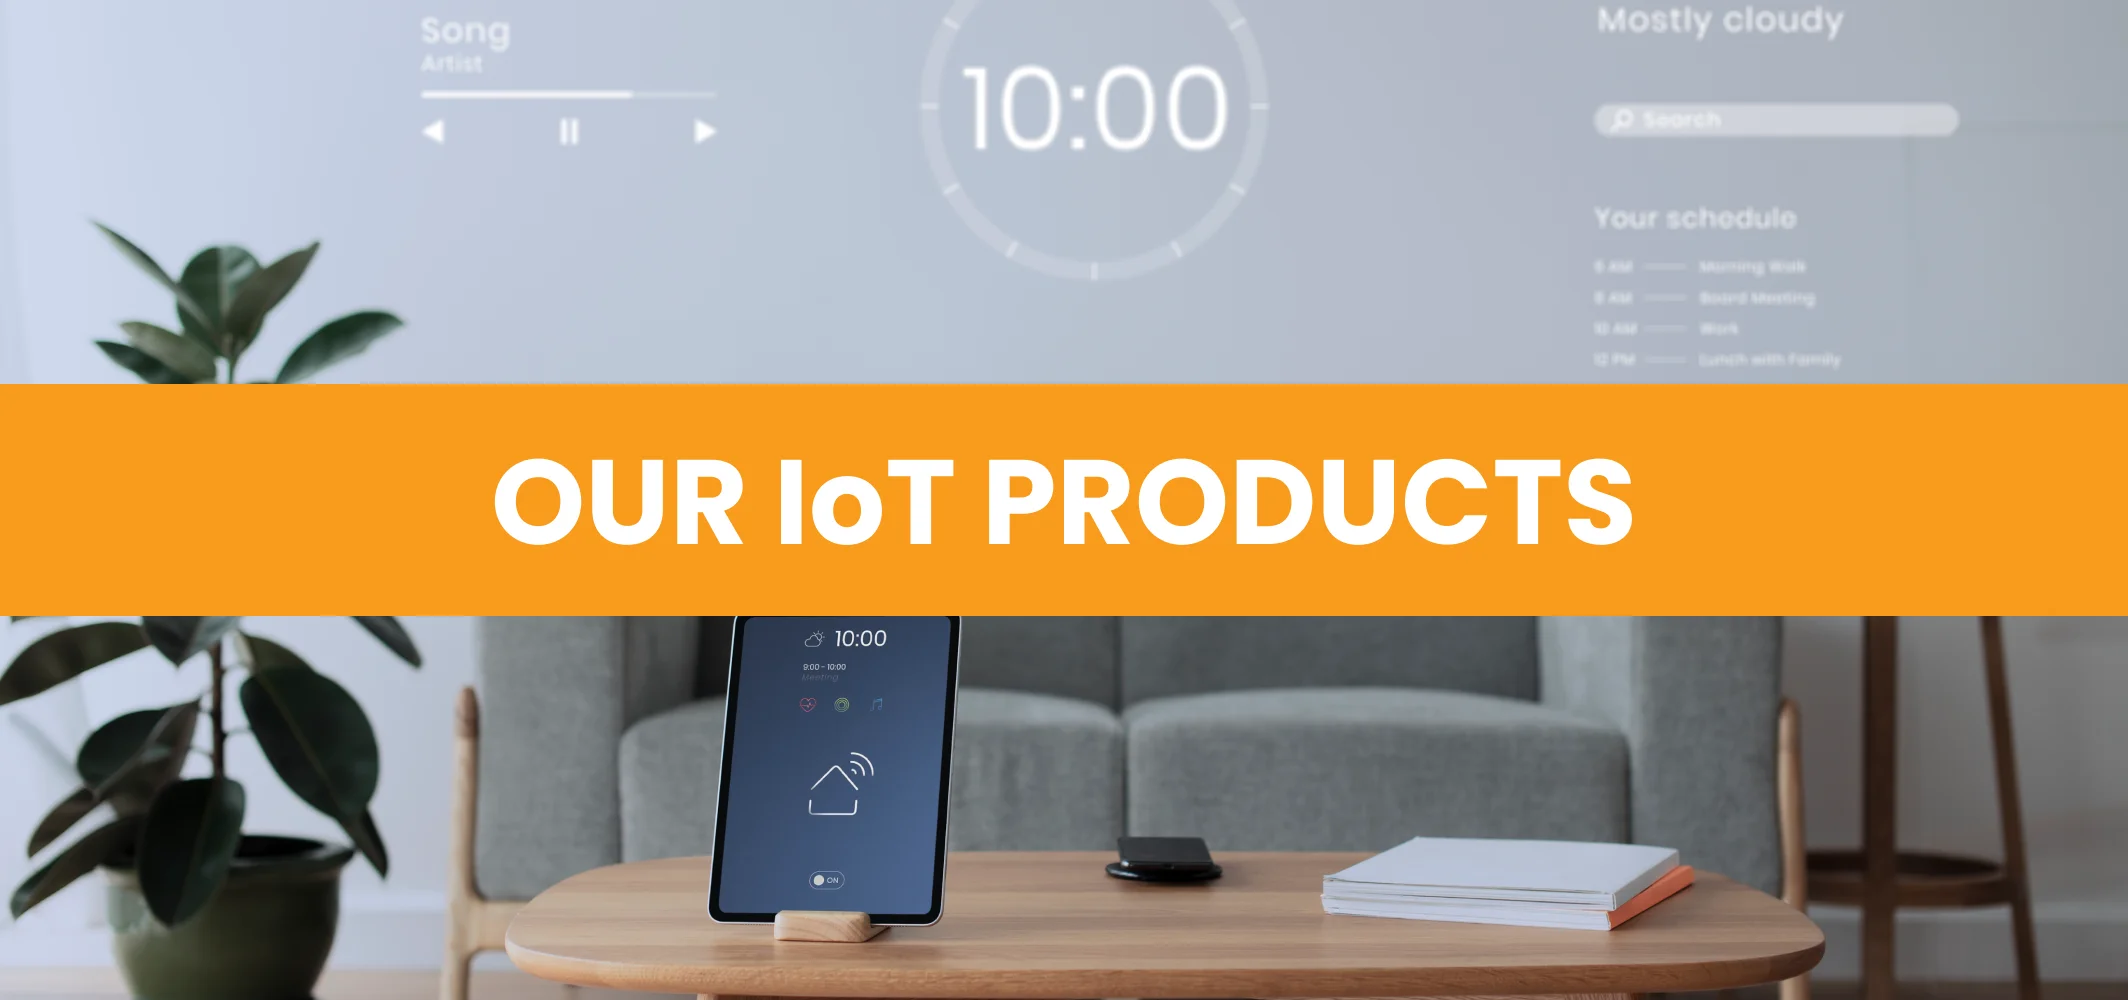 Our IoT Products